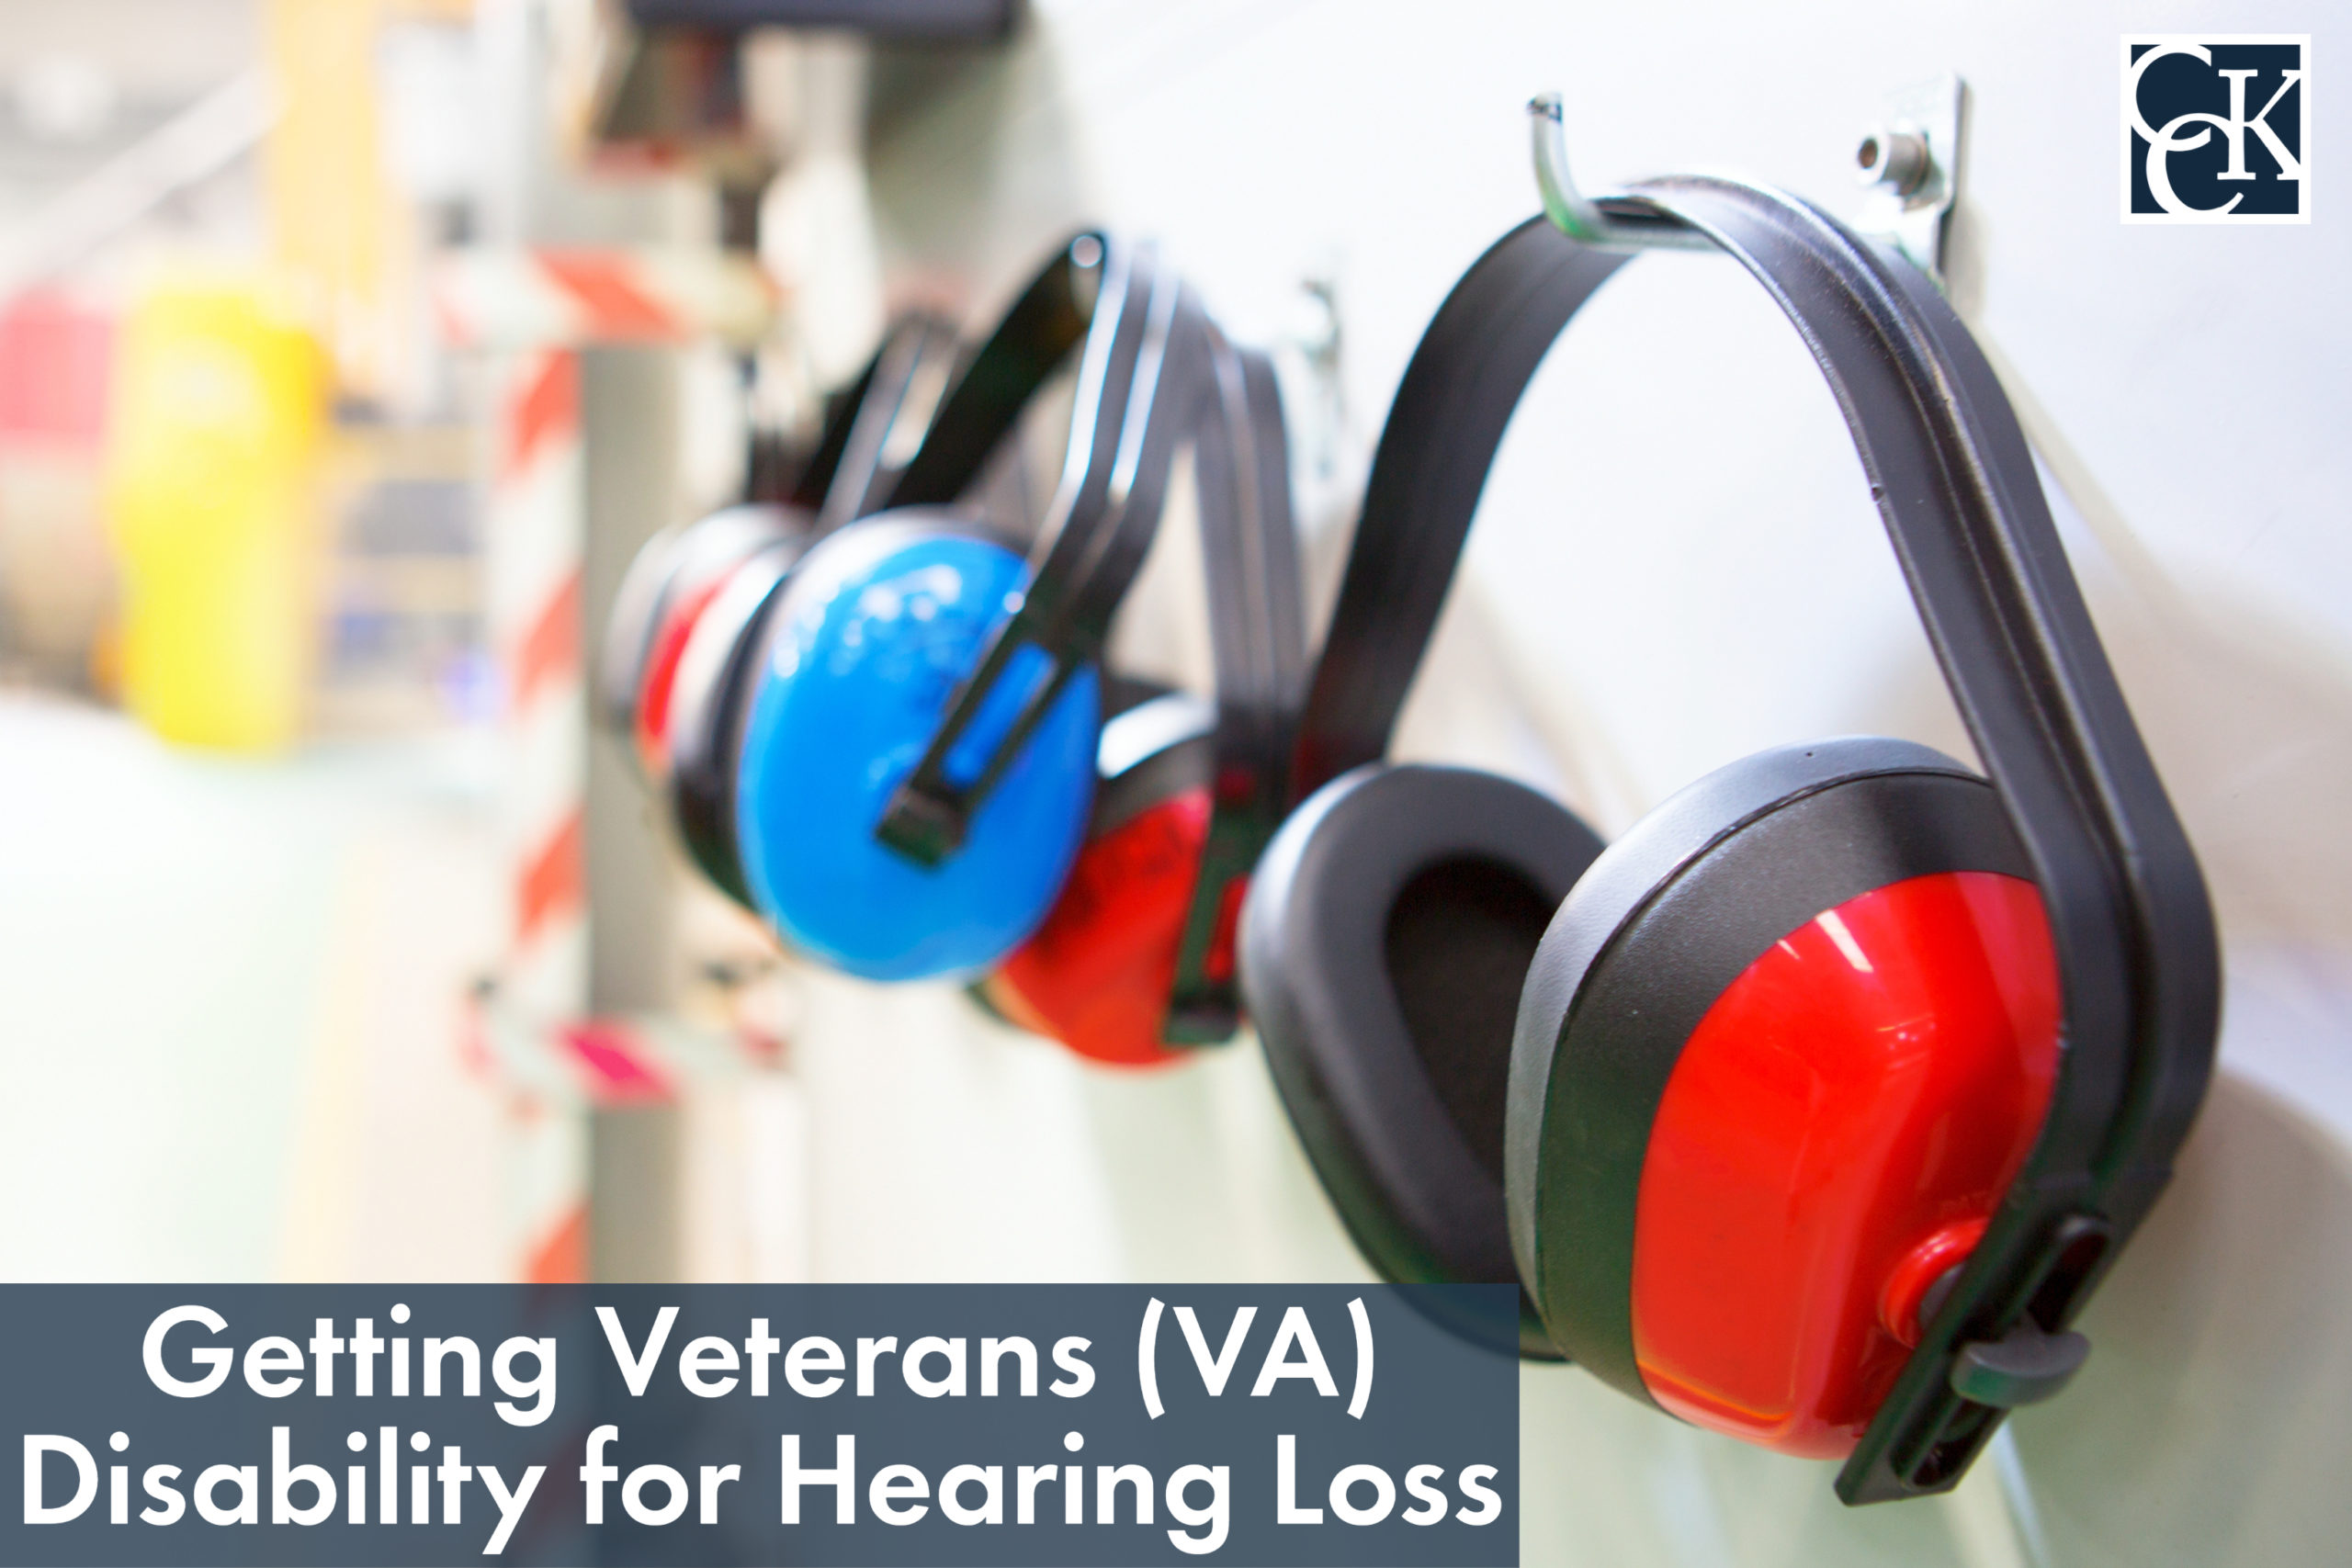 Who Is Eligible for Hearing Aids from VA?